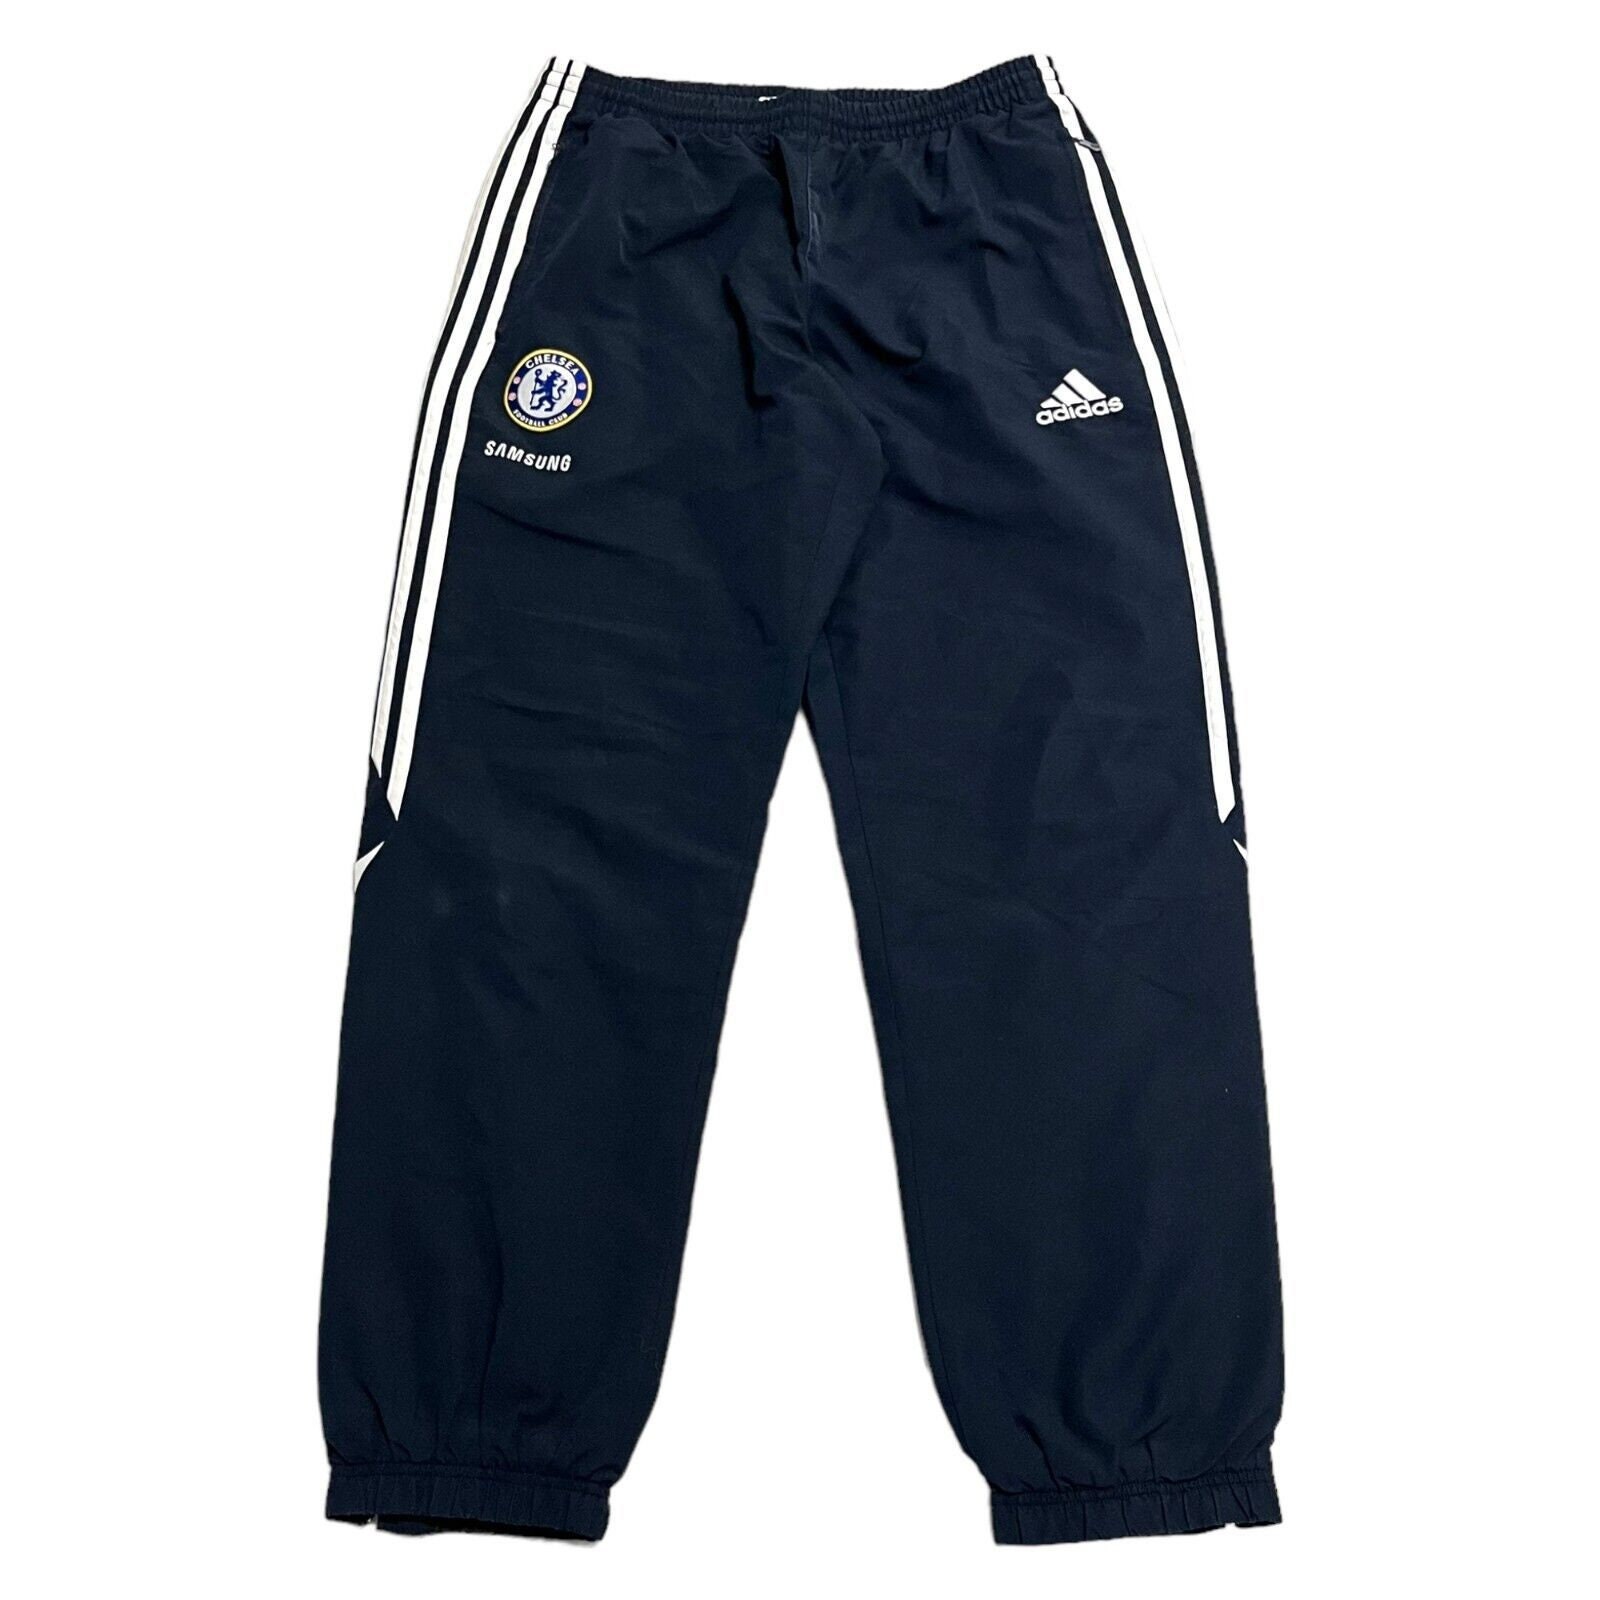 Leicester City Training Football Pants Navy Blue Adidas Mens Size M  IBVET